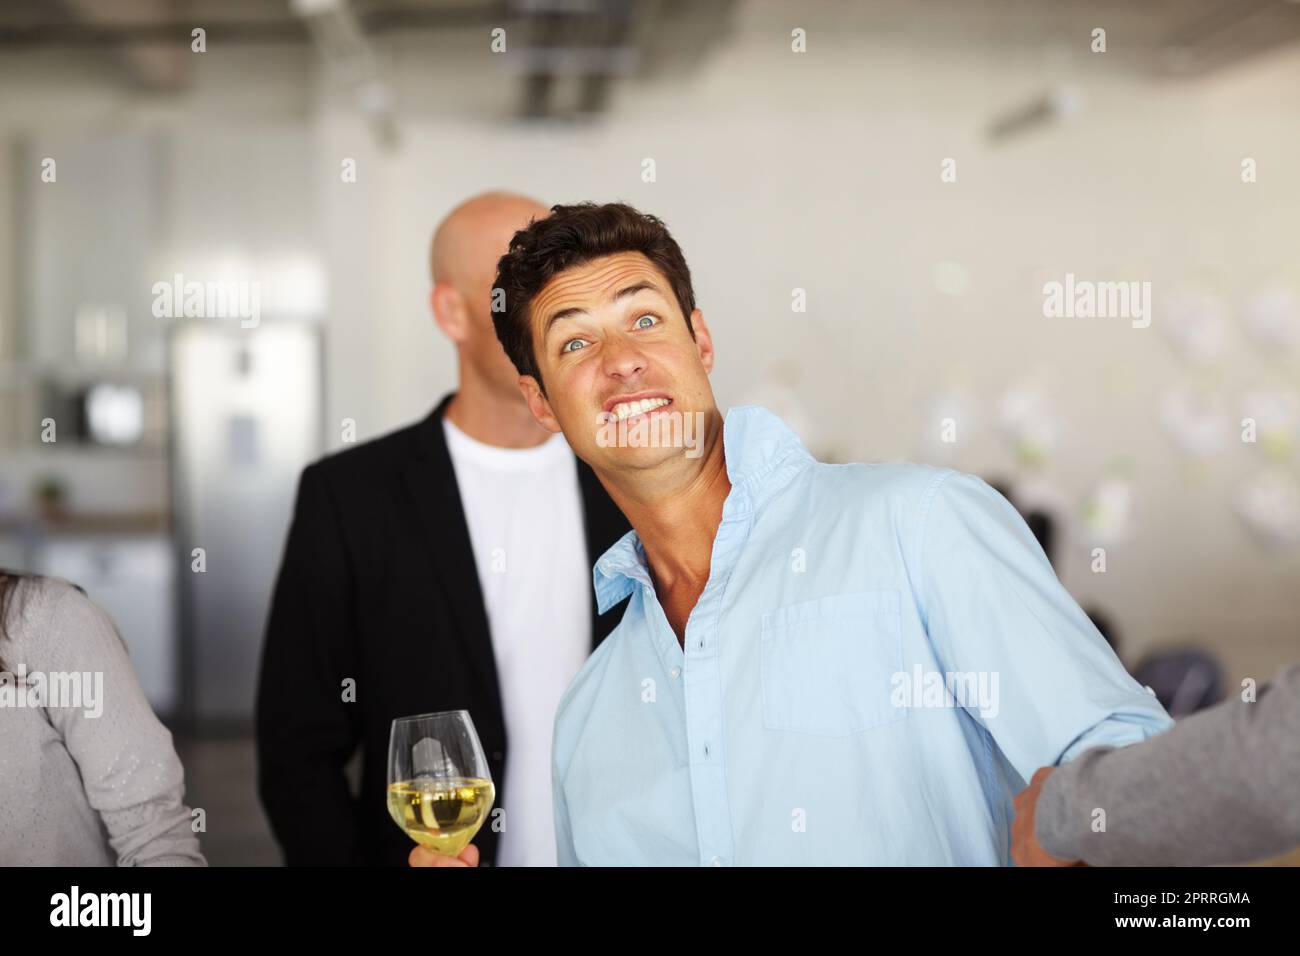 Free booze freakout. A drunk man holding a glass of wine and pulling faces at an office social. Stock Photo